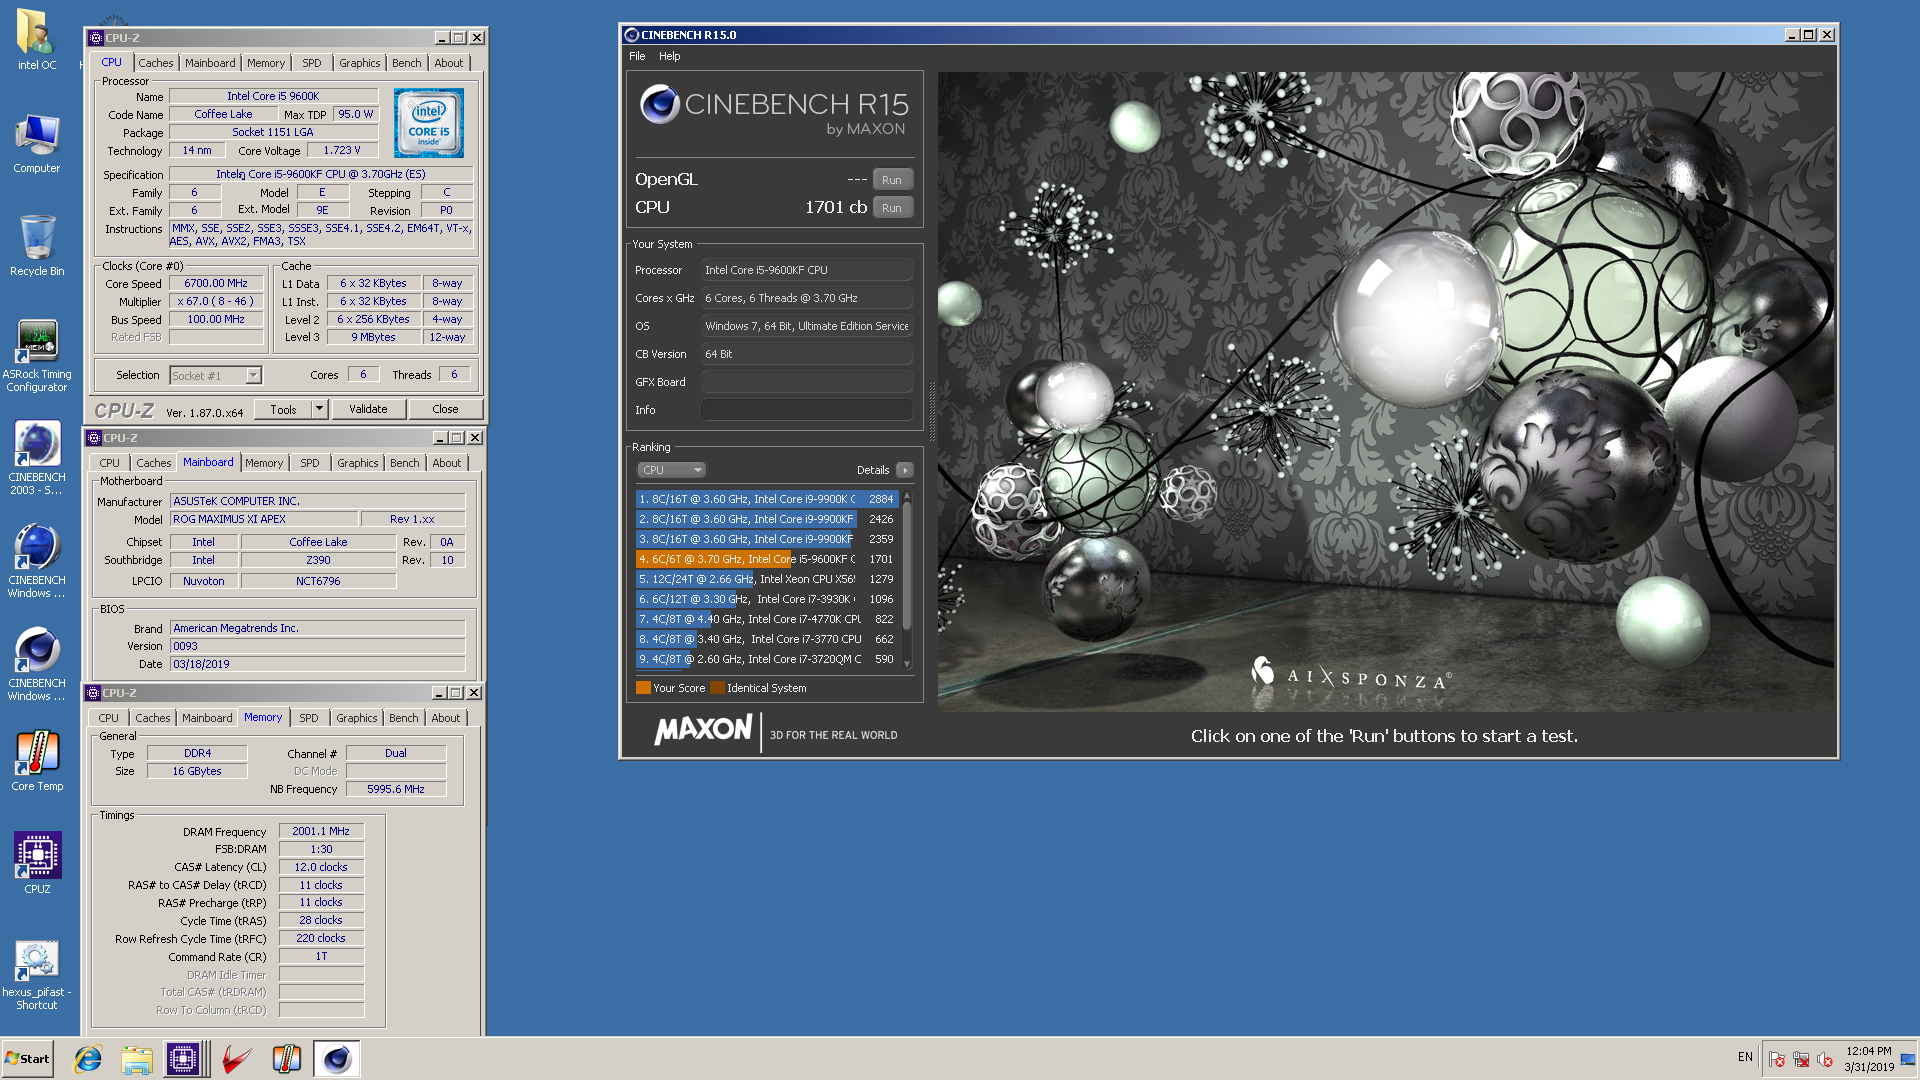 noppon1412`s Cinebench - R15 score: 1701 cb with a Core i5 9600KF